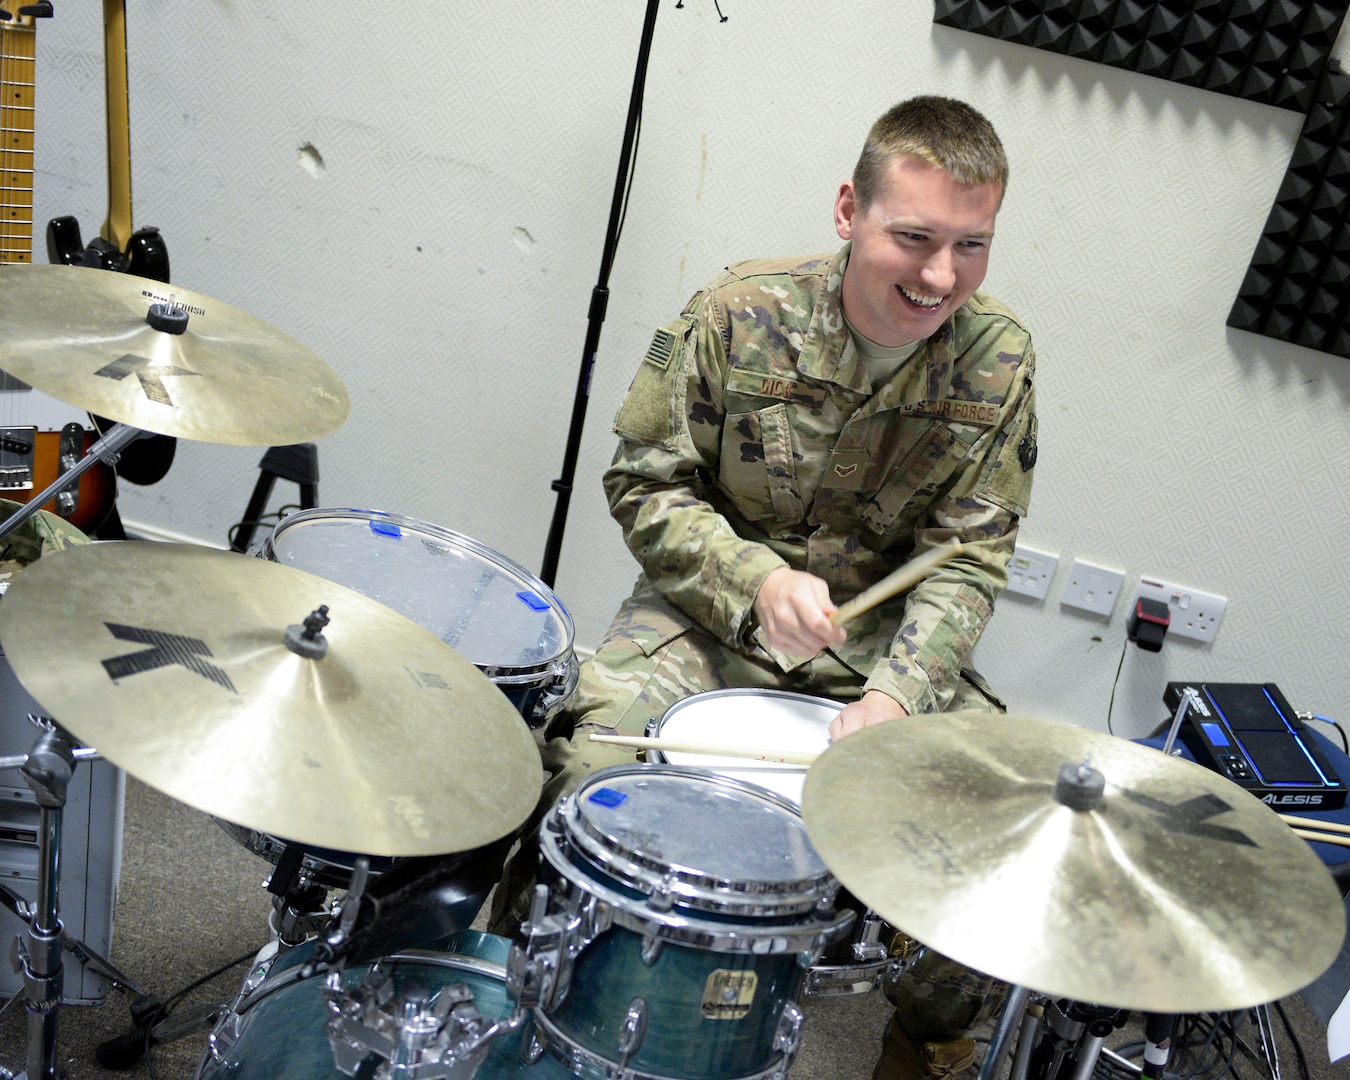 U.S. Air Force Airman 1st Class Joshua Dick, drummer assigned to the Air Force Central Command Band, practices drums in preparation for a concert at Al Udeid, Air Force Base, Qatar, May 25, 2017. The AFCENT Band, stationed at Al Udeid, travels throughout the Central Command Area of Responsibility in support of building partnerships, boosting morale, and providing diplomacy and outreach to host nation communities. (U.S. Air Force photo by Tech. Sgt. Bradly A. Schneider/Released)